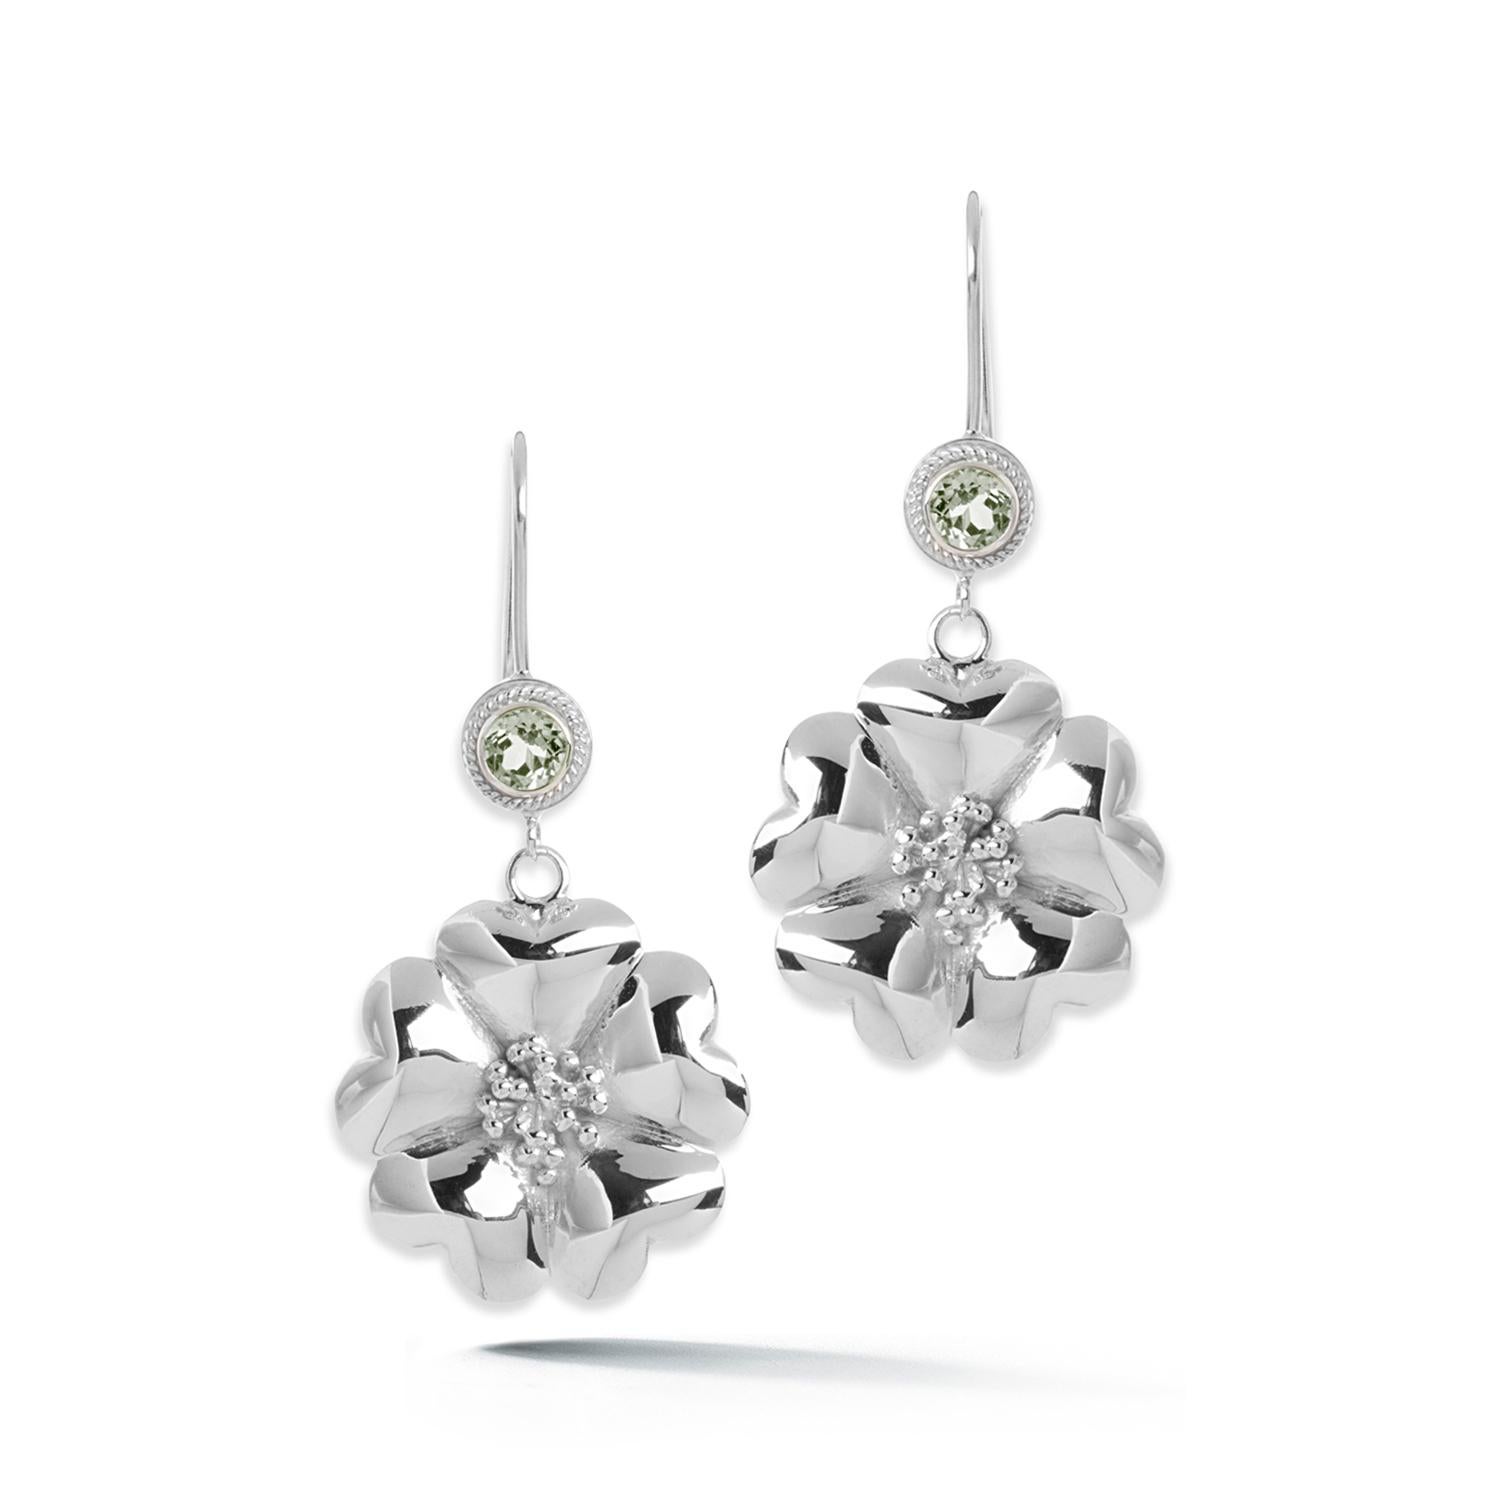 Designed in NYC

.925 Sterling Silver 2 x 5 mm White Topaz Blossom Stone Wire Hook Earrings. No matter the season, allow natural beauty to surround you wherever you go. Blossom stone wire hook earrings: 

Sterling silver 
High-polish 
Light-weight